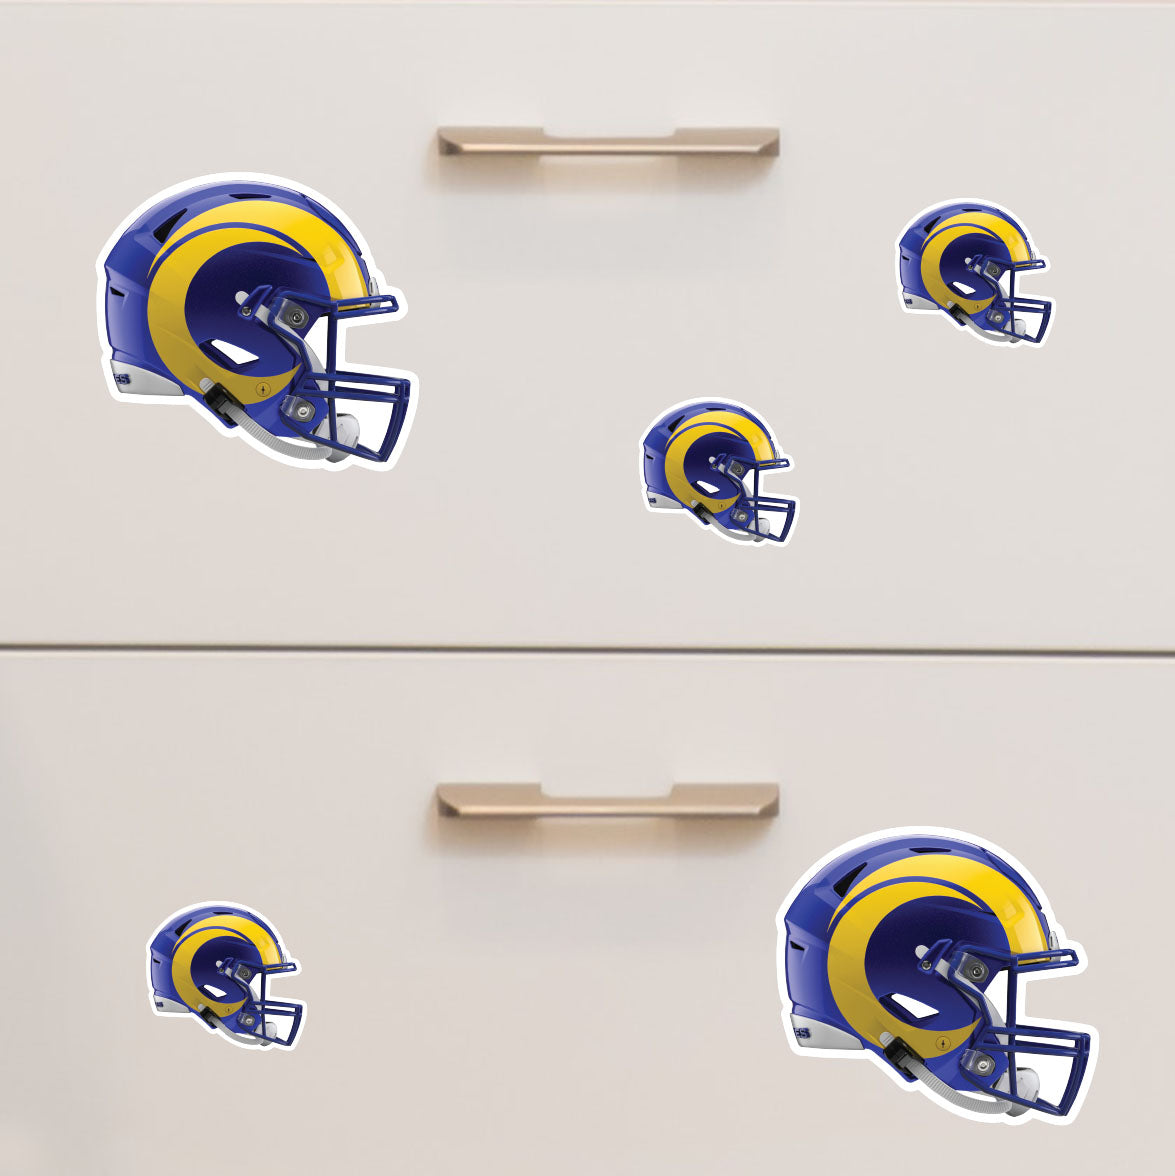 Los Angeles Rams: Helmet Minis - Officially Licensed NFL Removable Adhesive Decal